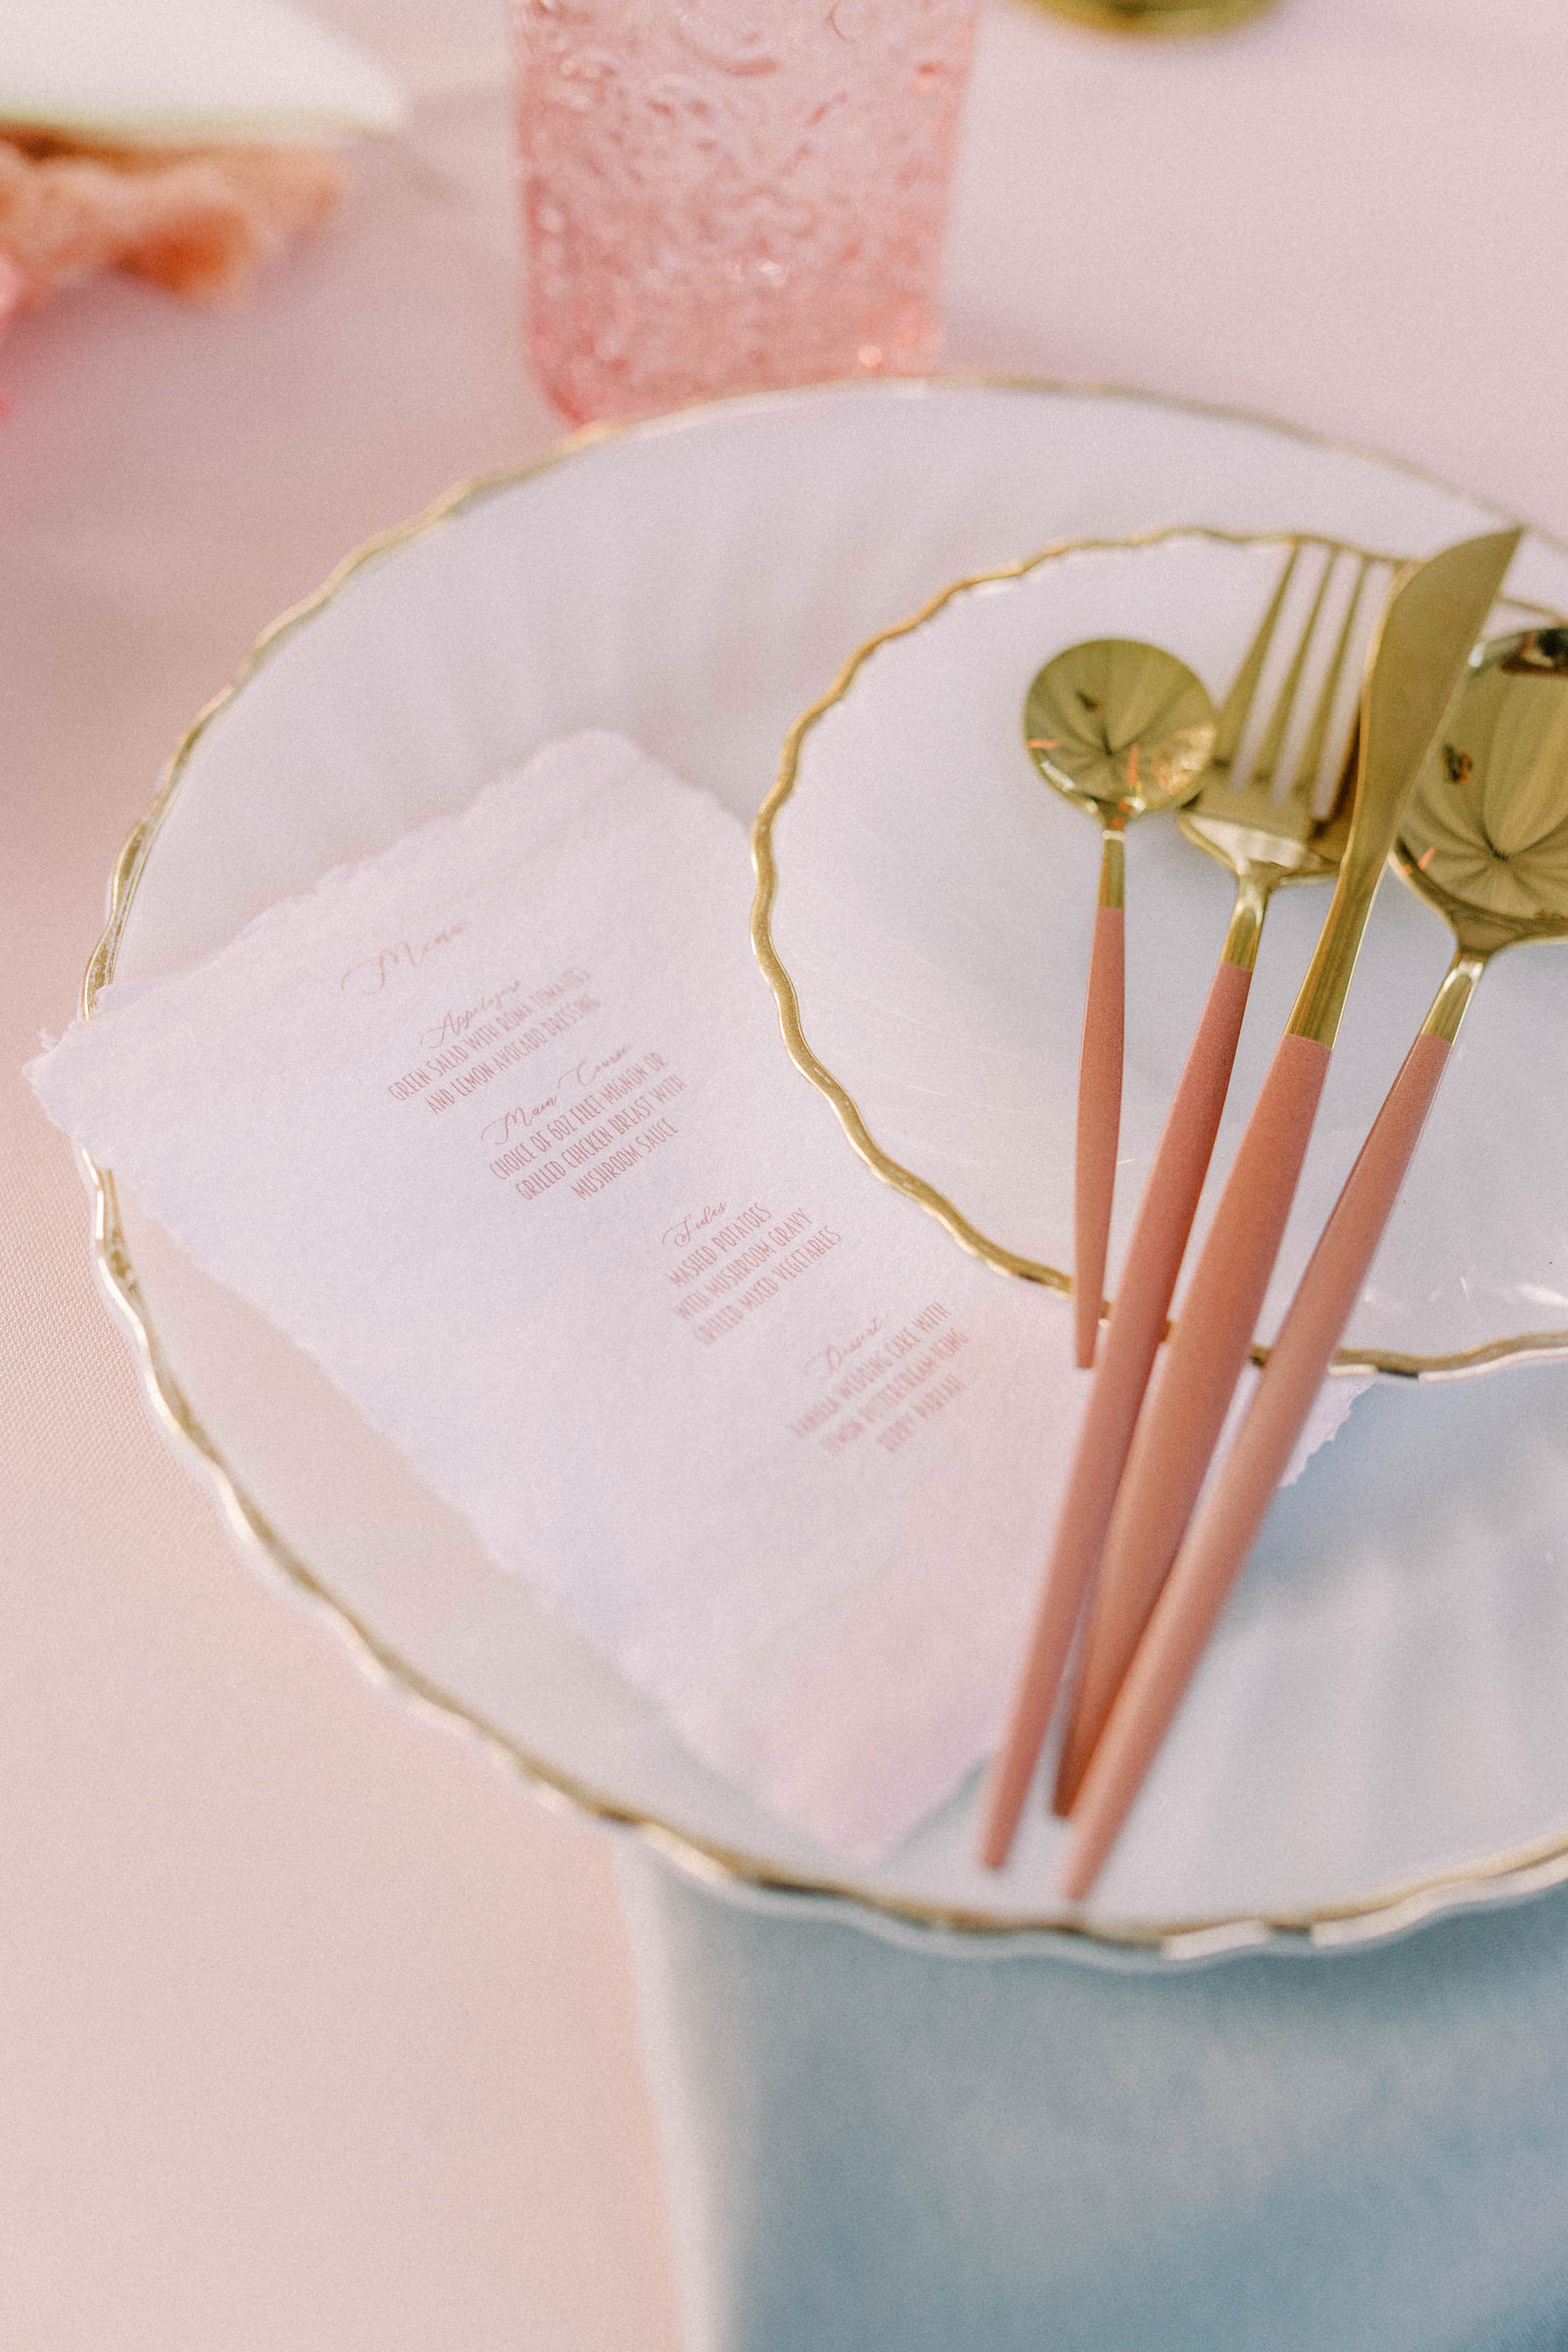 Garden Whimsical Wedding Decor, White and Gold Rimmed Charger, Pink and Gold Silverware | Kate Ryan Event Rentals